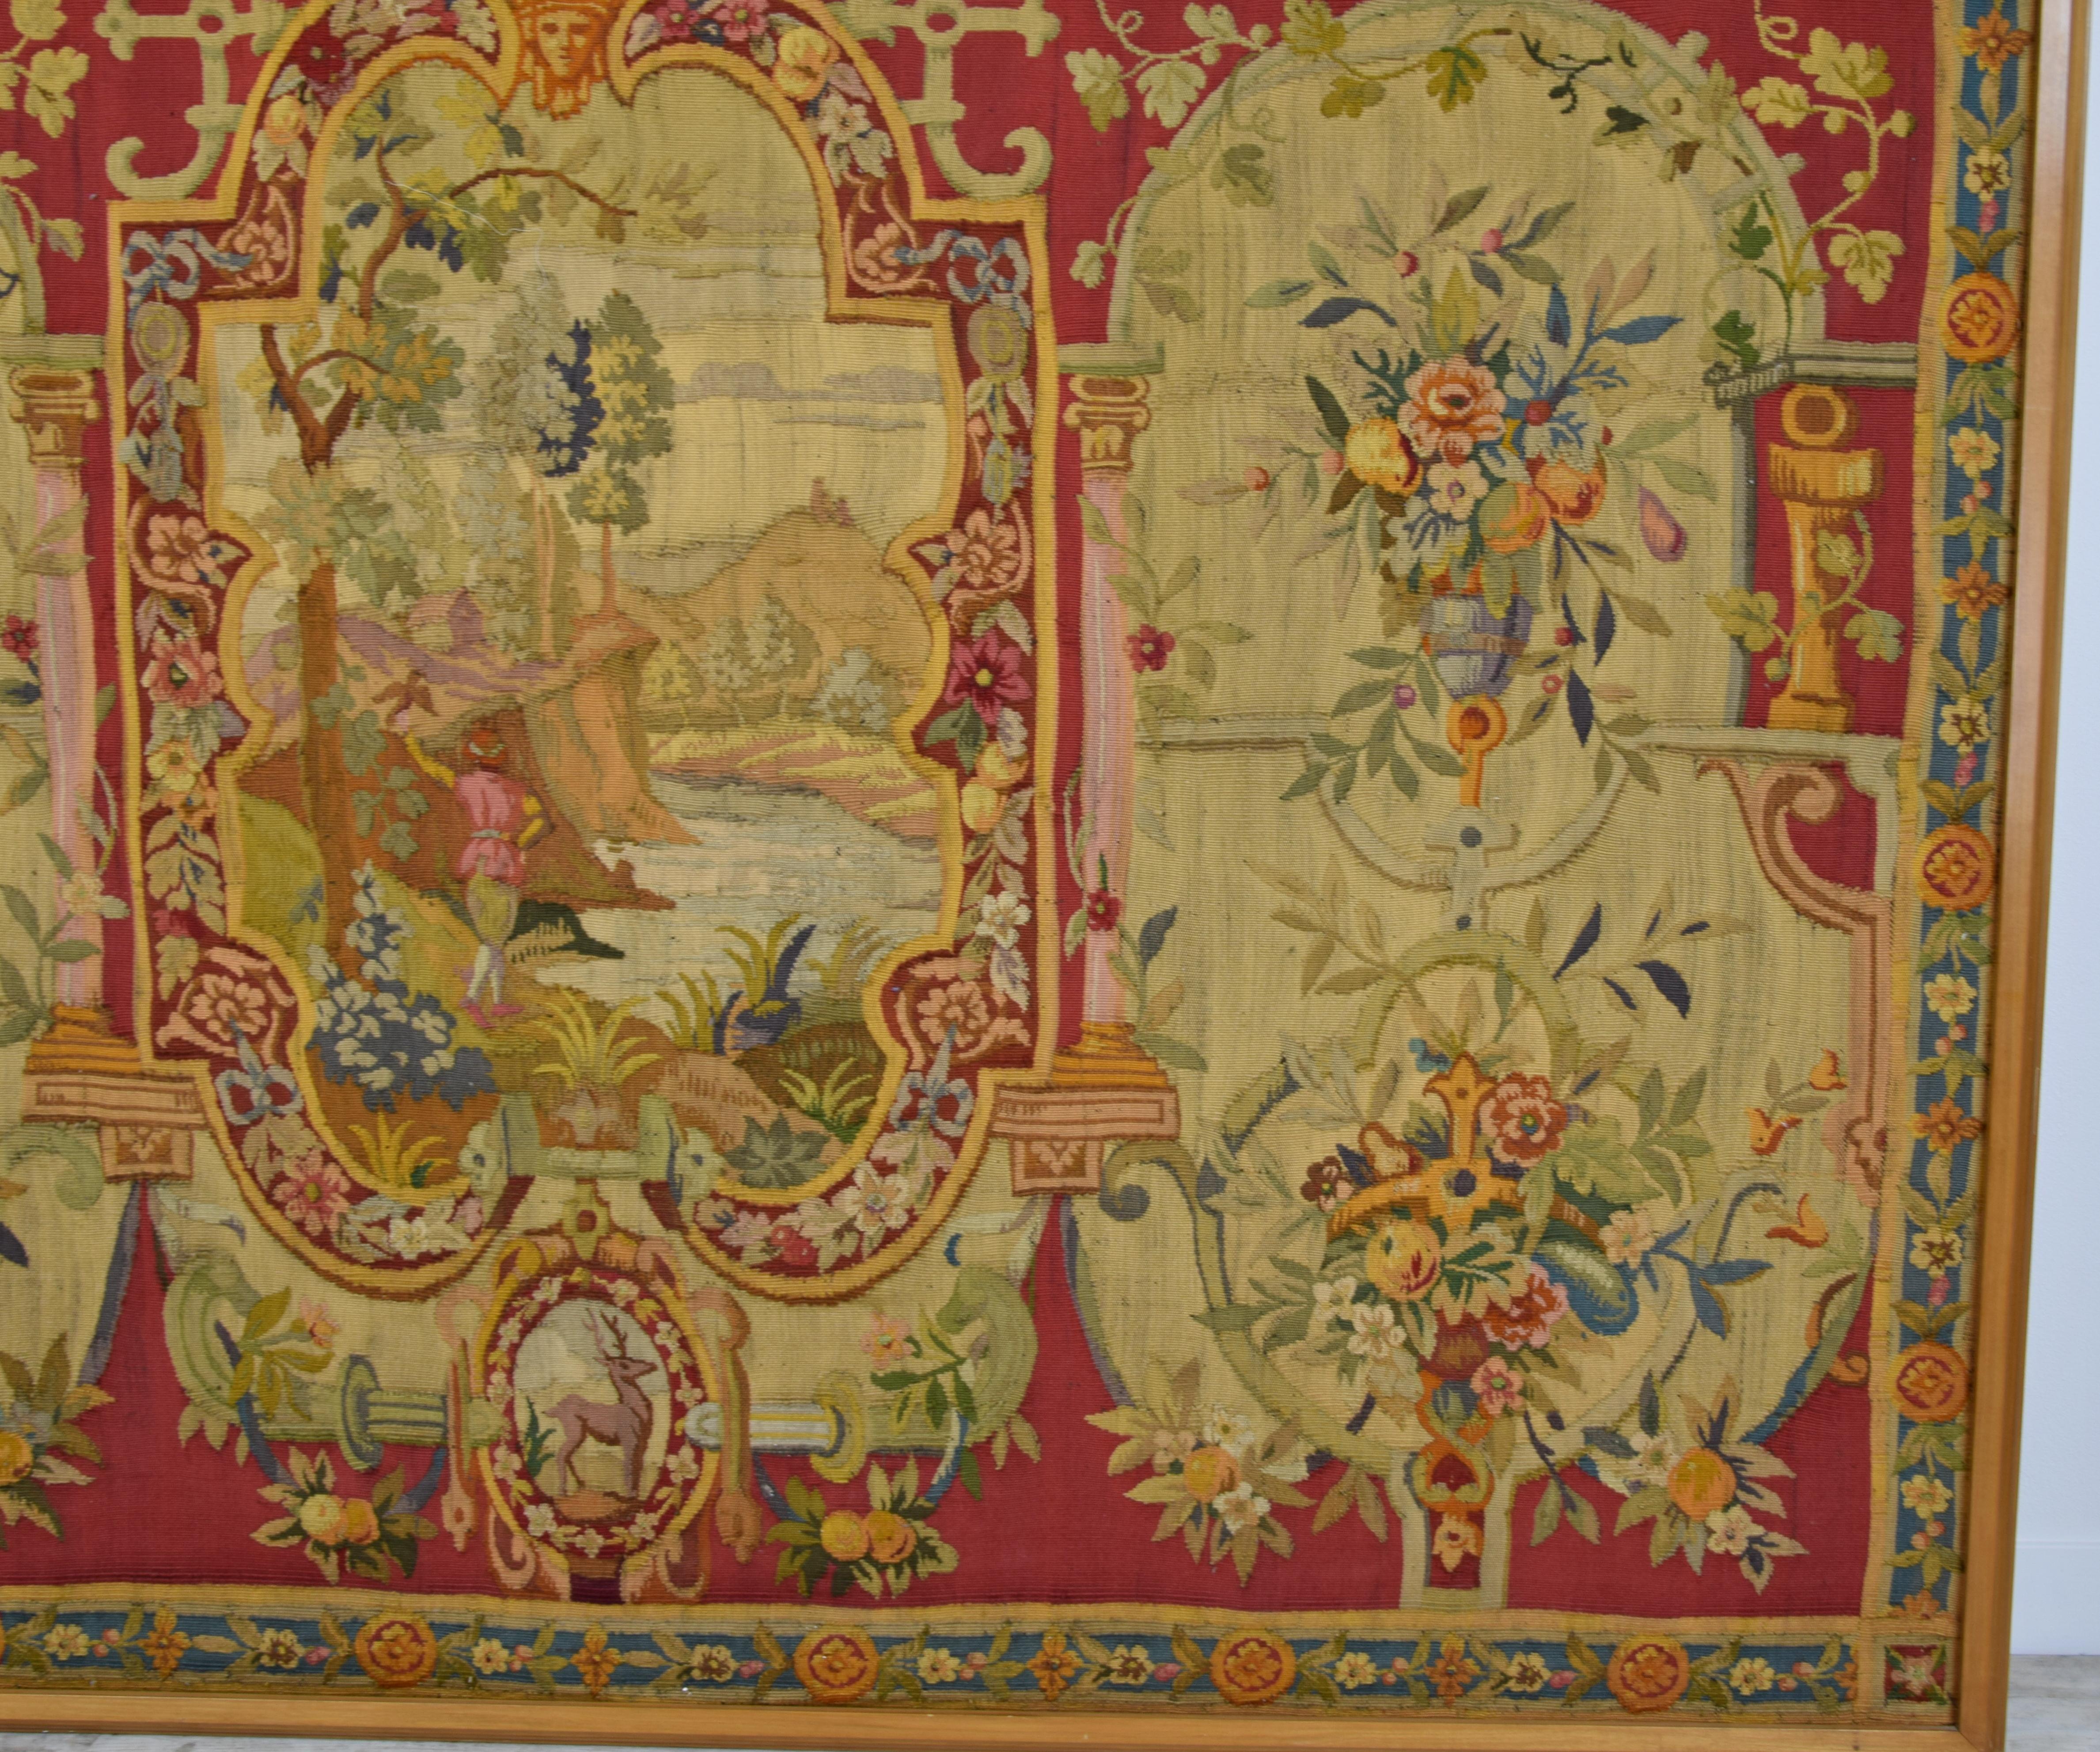 European 18th Century Wool Tapestry with Floral Decorations and River Landscape